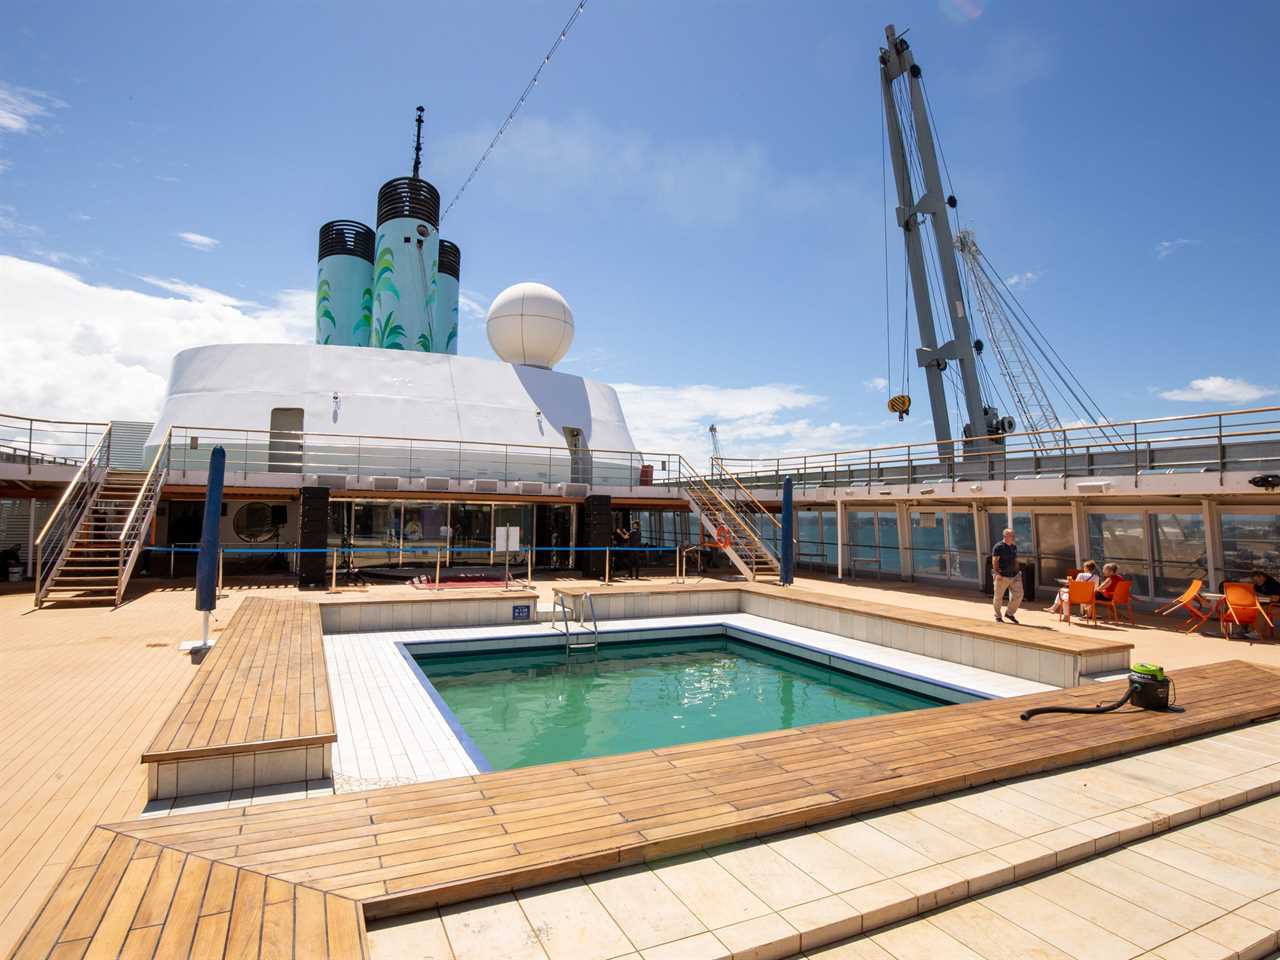 An empty pool on a cruise ship.